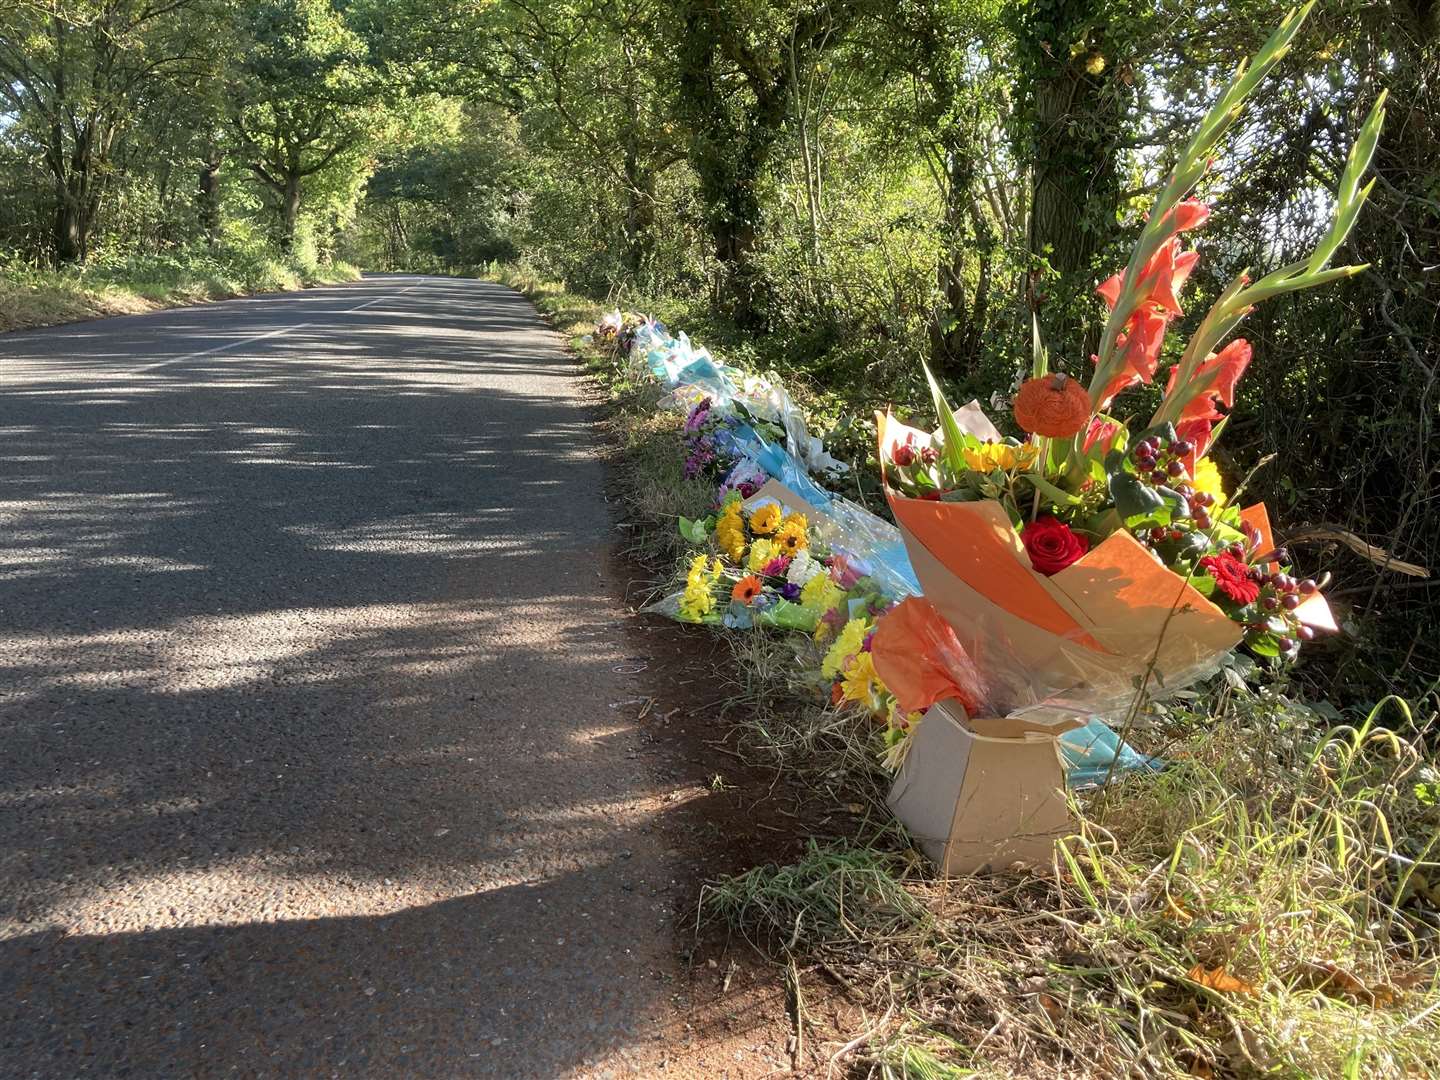 More than 50 floral tributes line Lenham Road, the scene of a crash which claimed four lives on Sunday, October 10 (52213808)